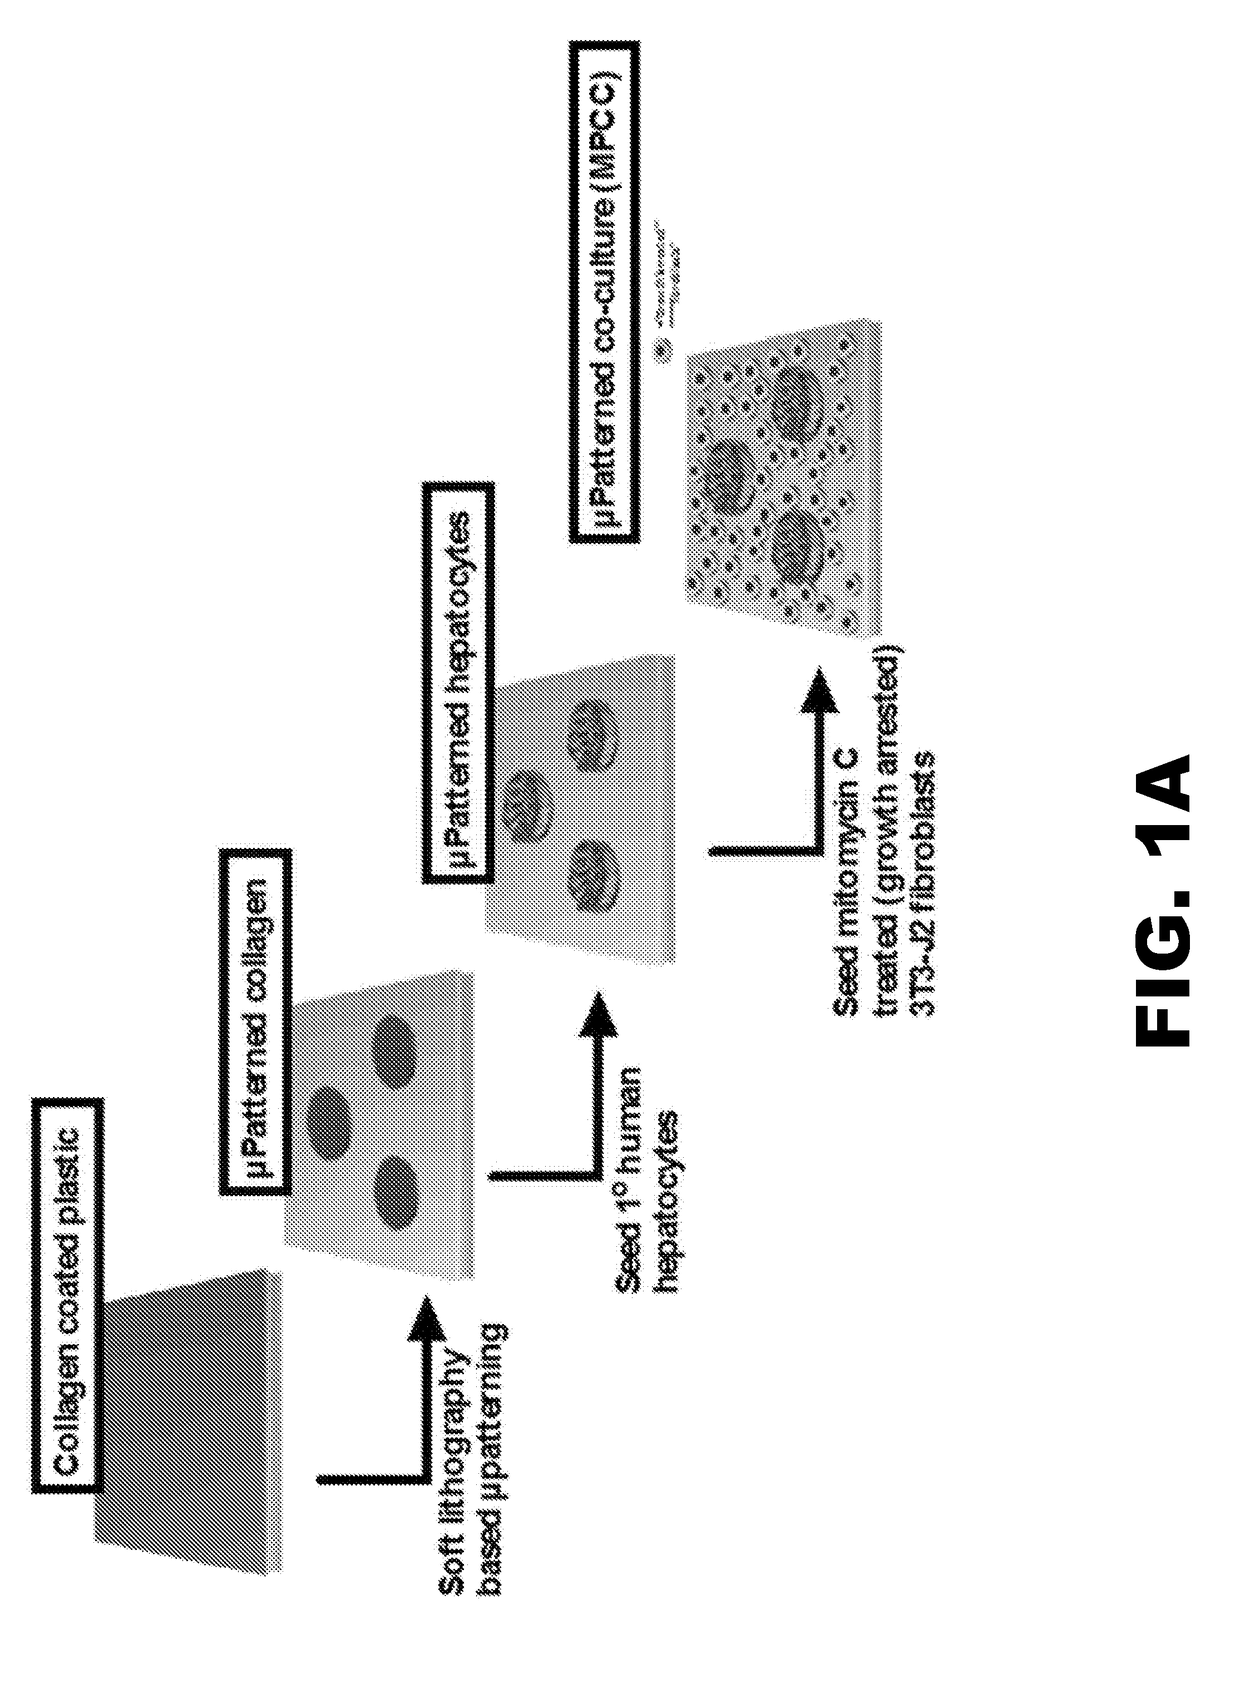 Compositions and methods for increasing hepatocyte functional lifetime in vitro